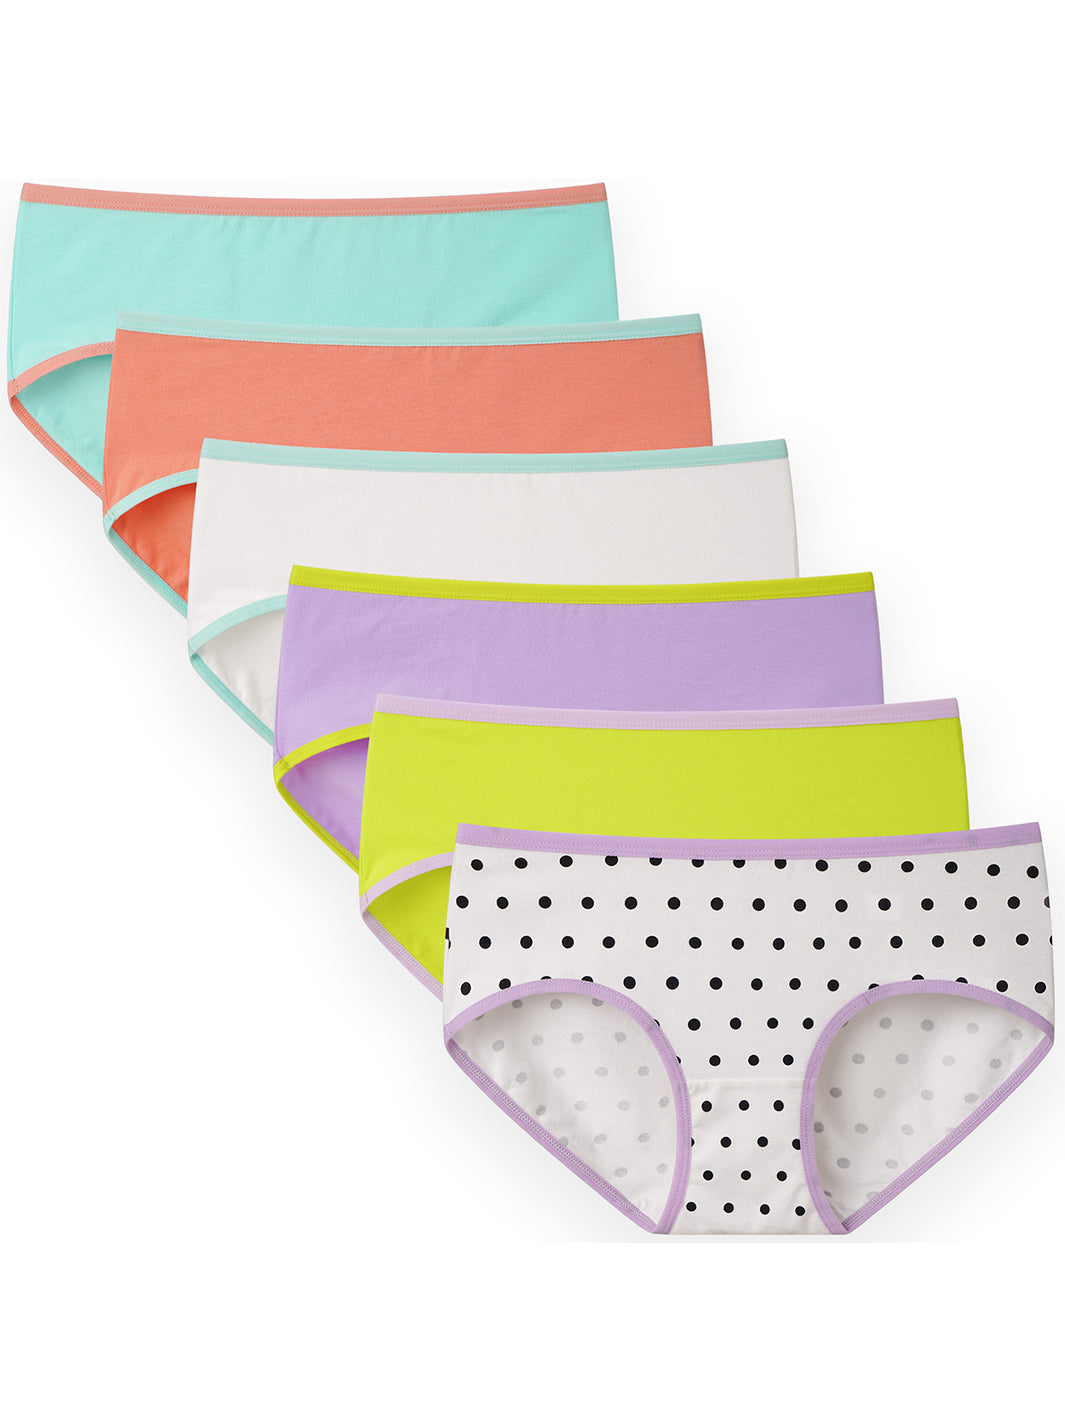 Girls Cotton Underwear Briefs - Pack of 6, Breathable & Assorted Prints,  Ages 2-6